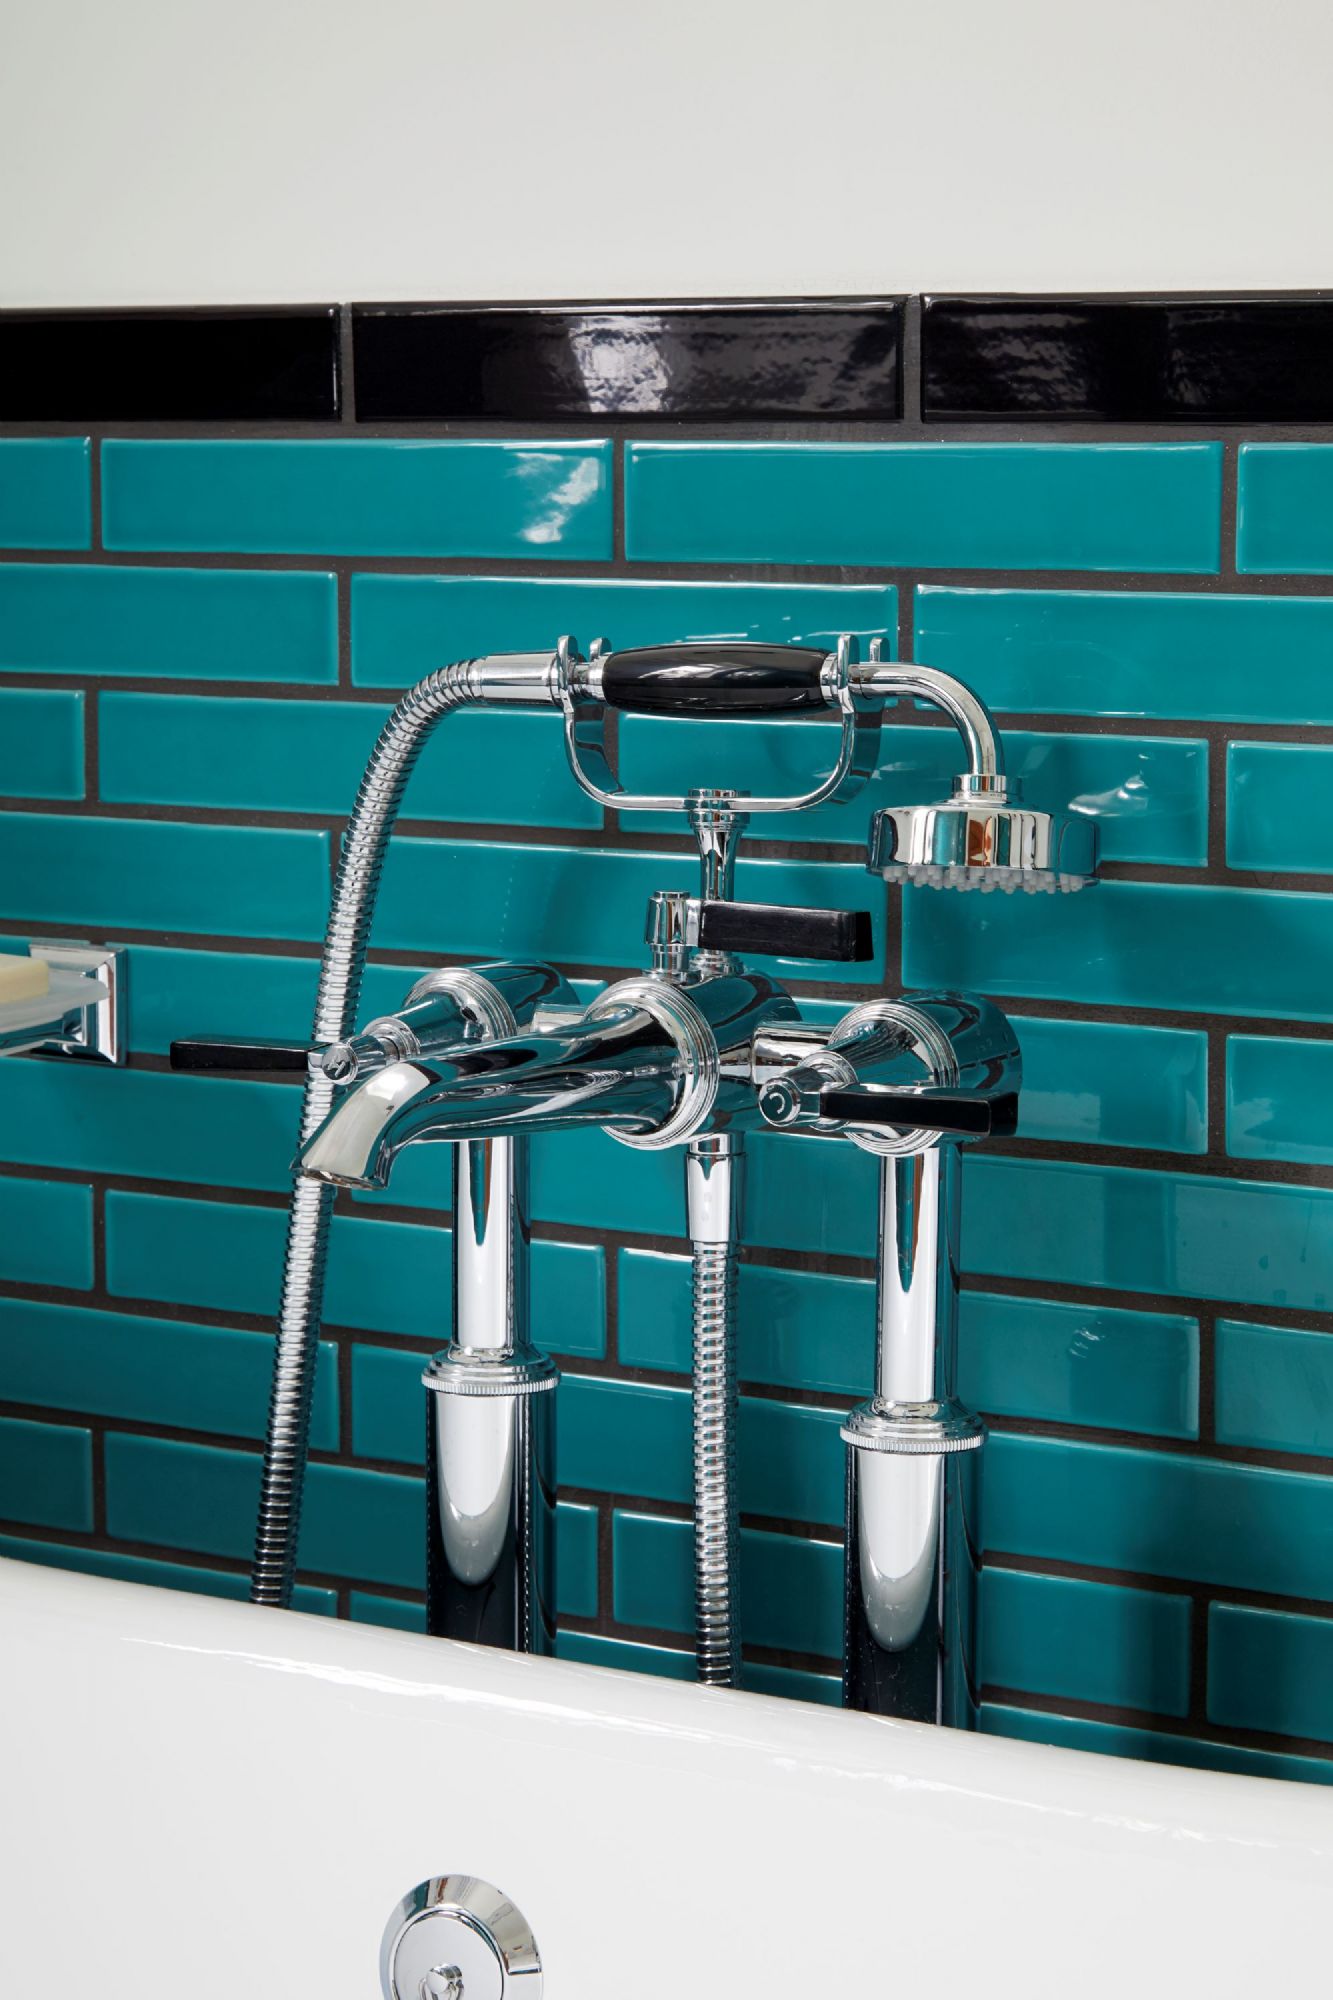 Shop the Samuel Heath Style Moderne Bath Shower Mixer, featured above in a North London bathroom renovation, recently designed by C.P. Hart. Please click here to explore this bathroom.